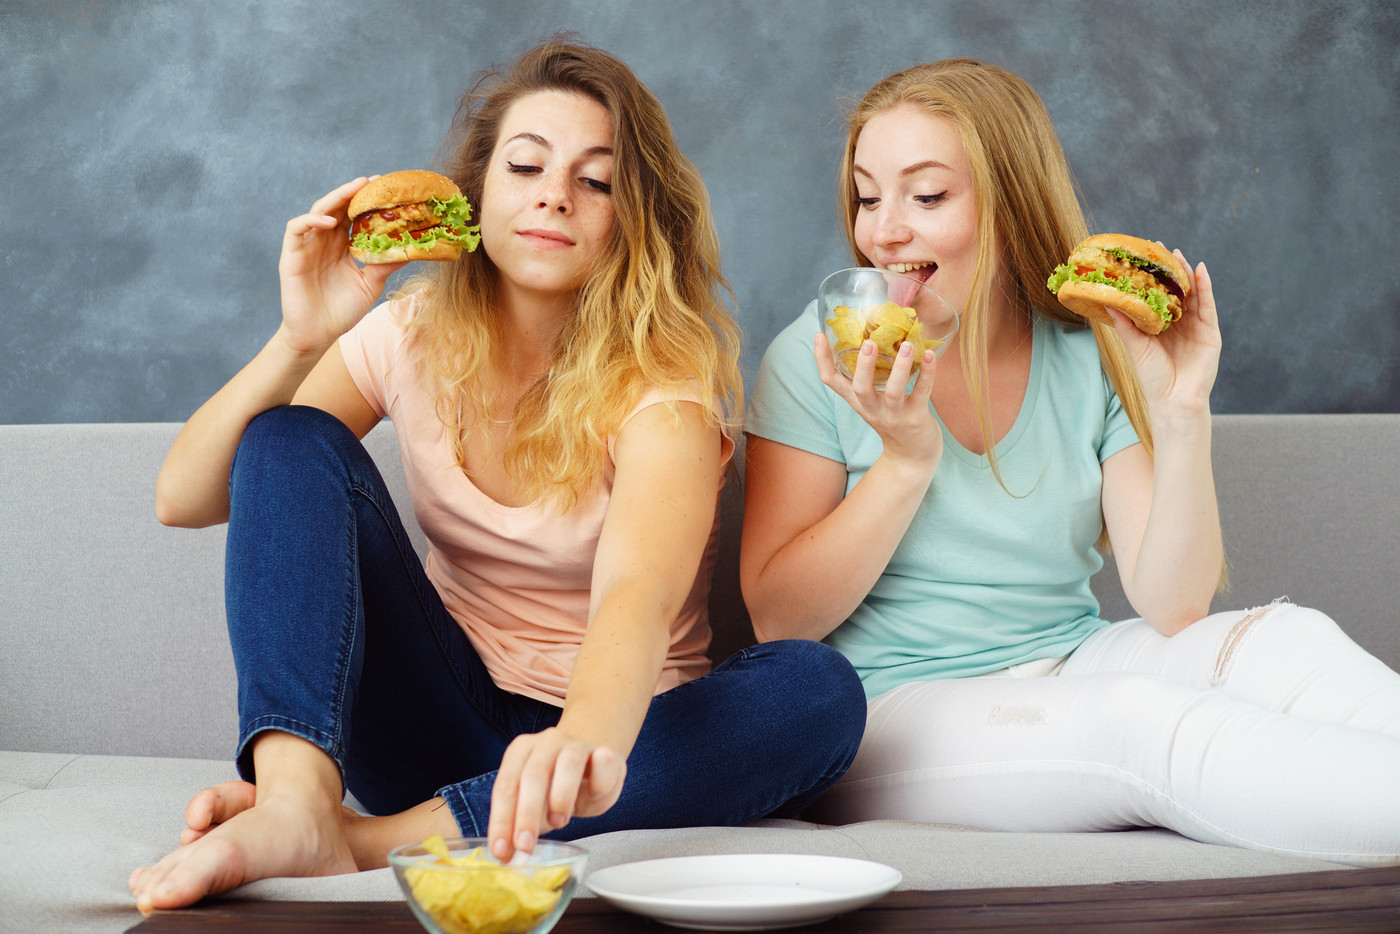 Two young women greedily eating burgers and chips